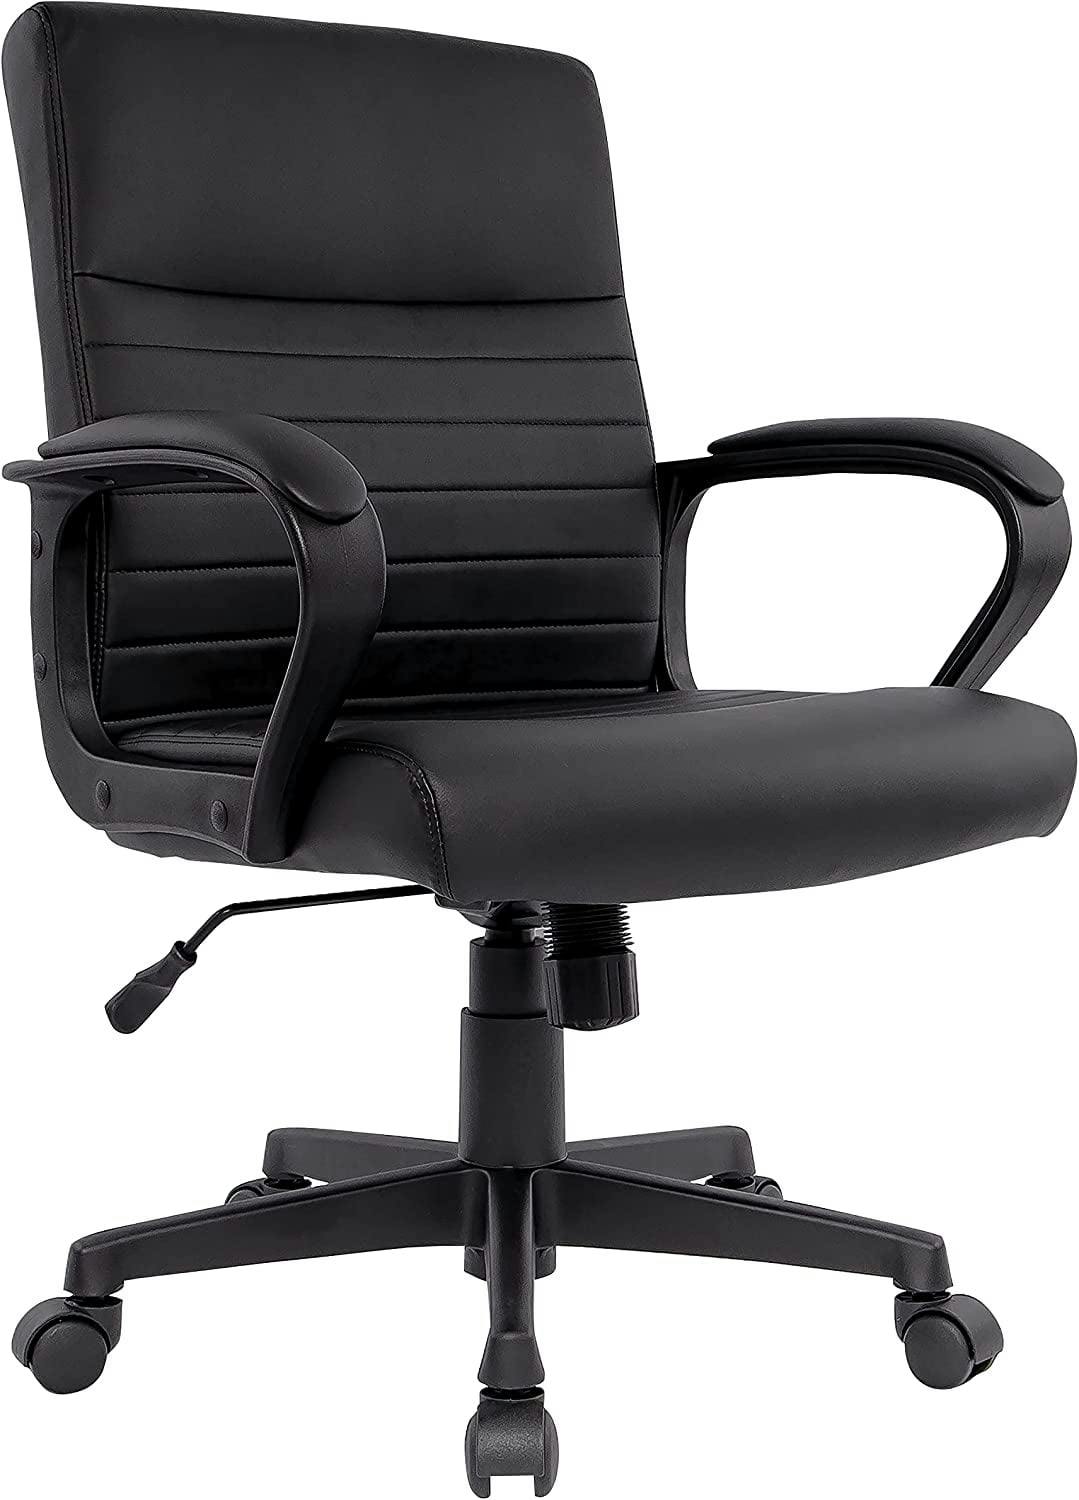 Tervina Executive Black Luxura Faux Leather Swivel Chair